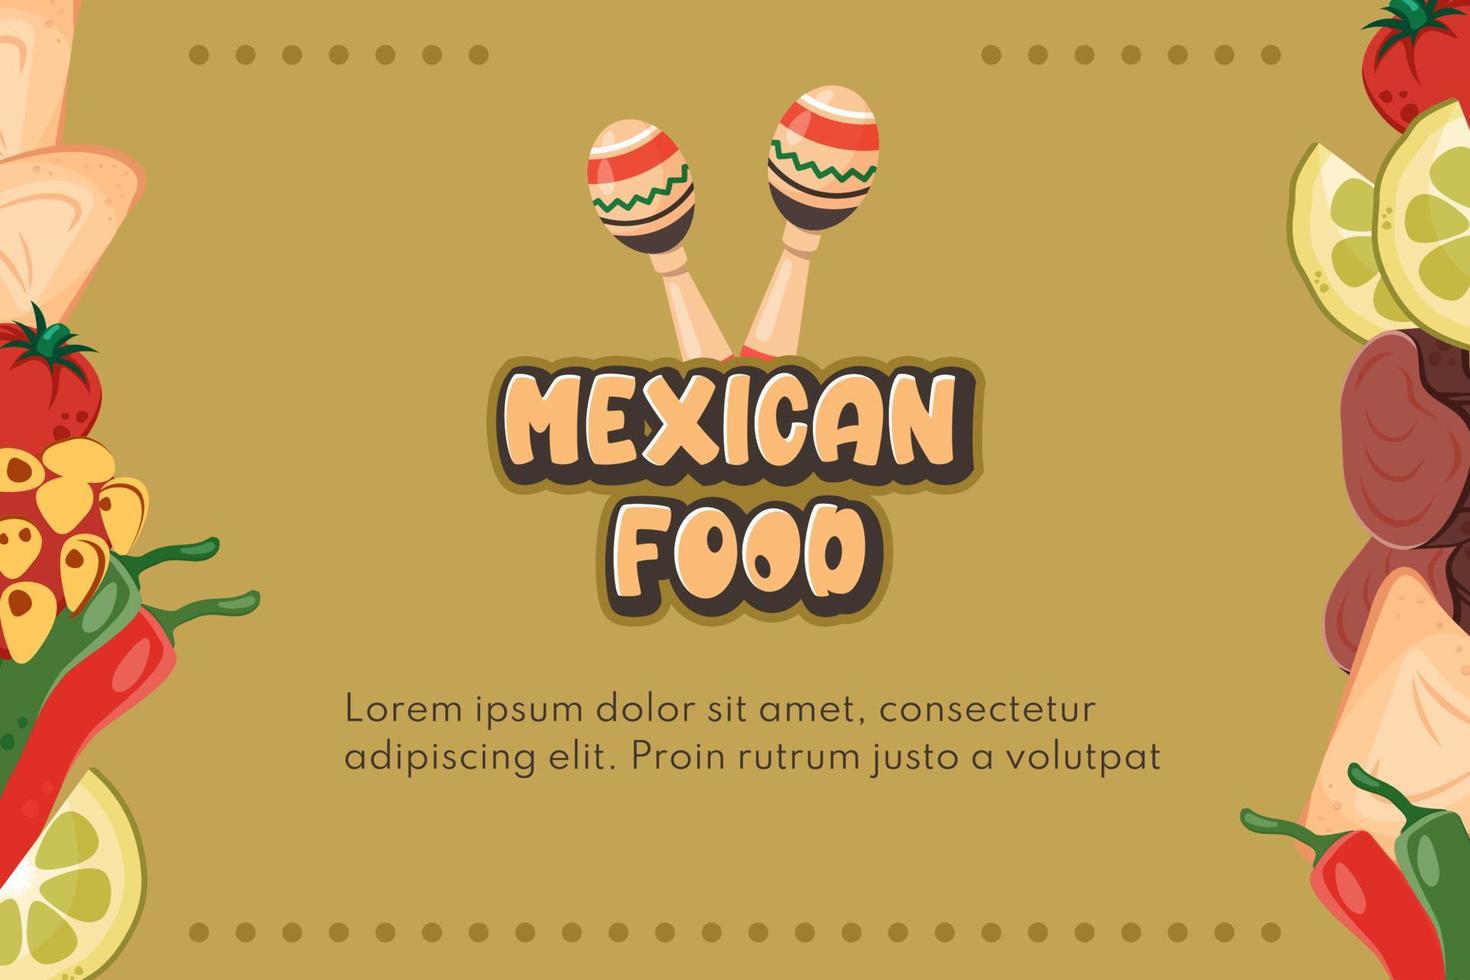 Latin American cuisine. Food background with vegetables, national Mexican elements, maracas, text. Vector flat drawn illustration for restaurant menu, poster, flyer, banner, delivery, cooking concept